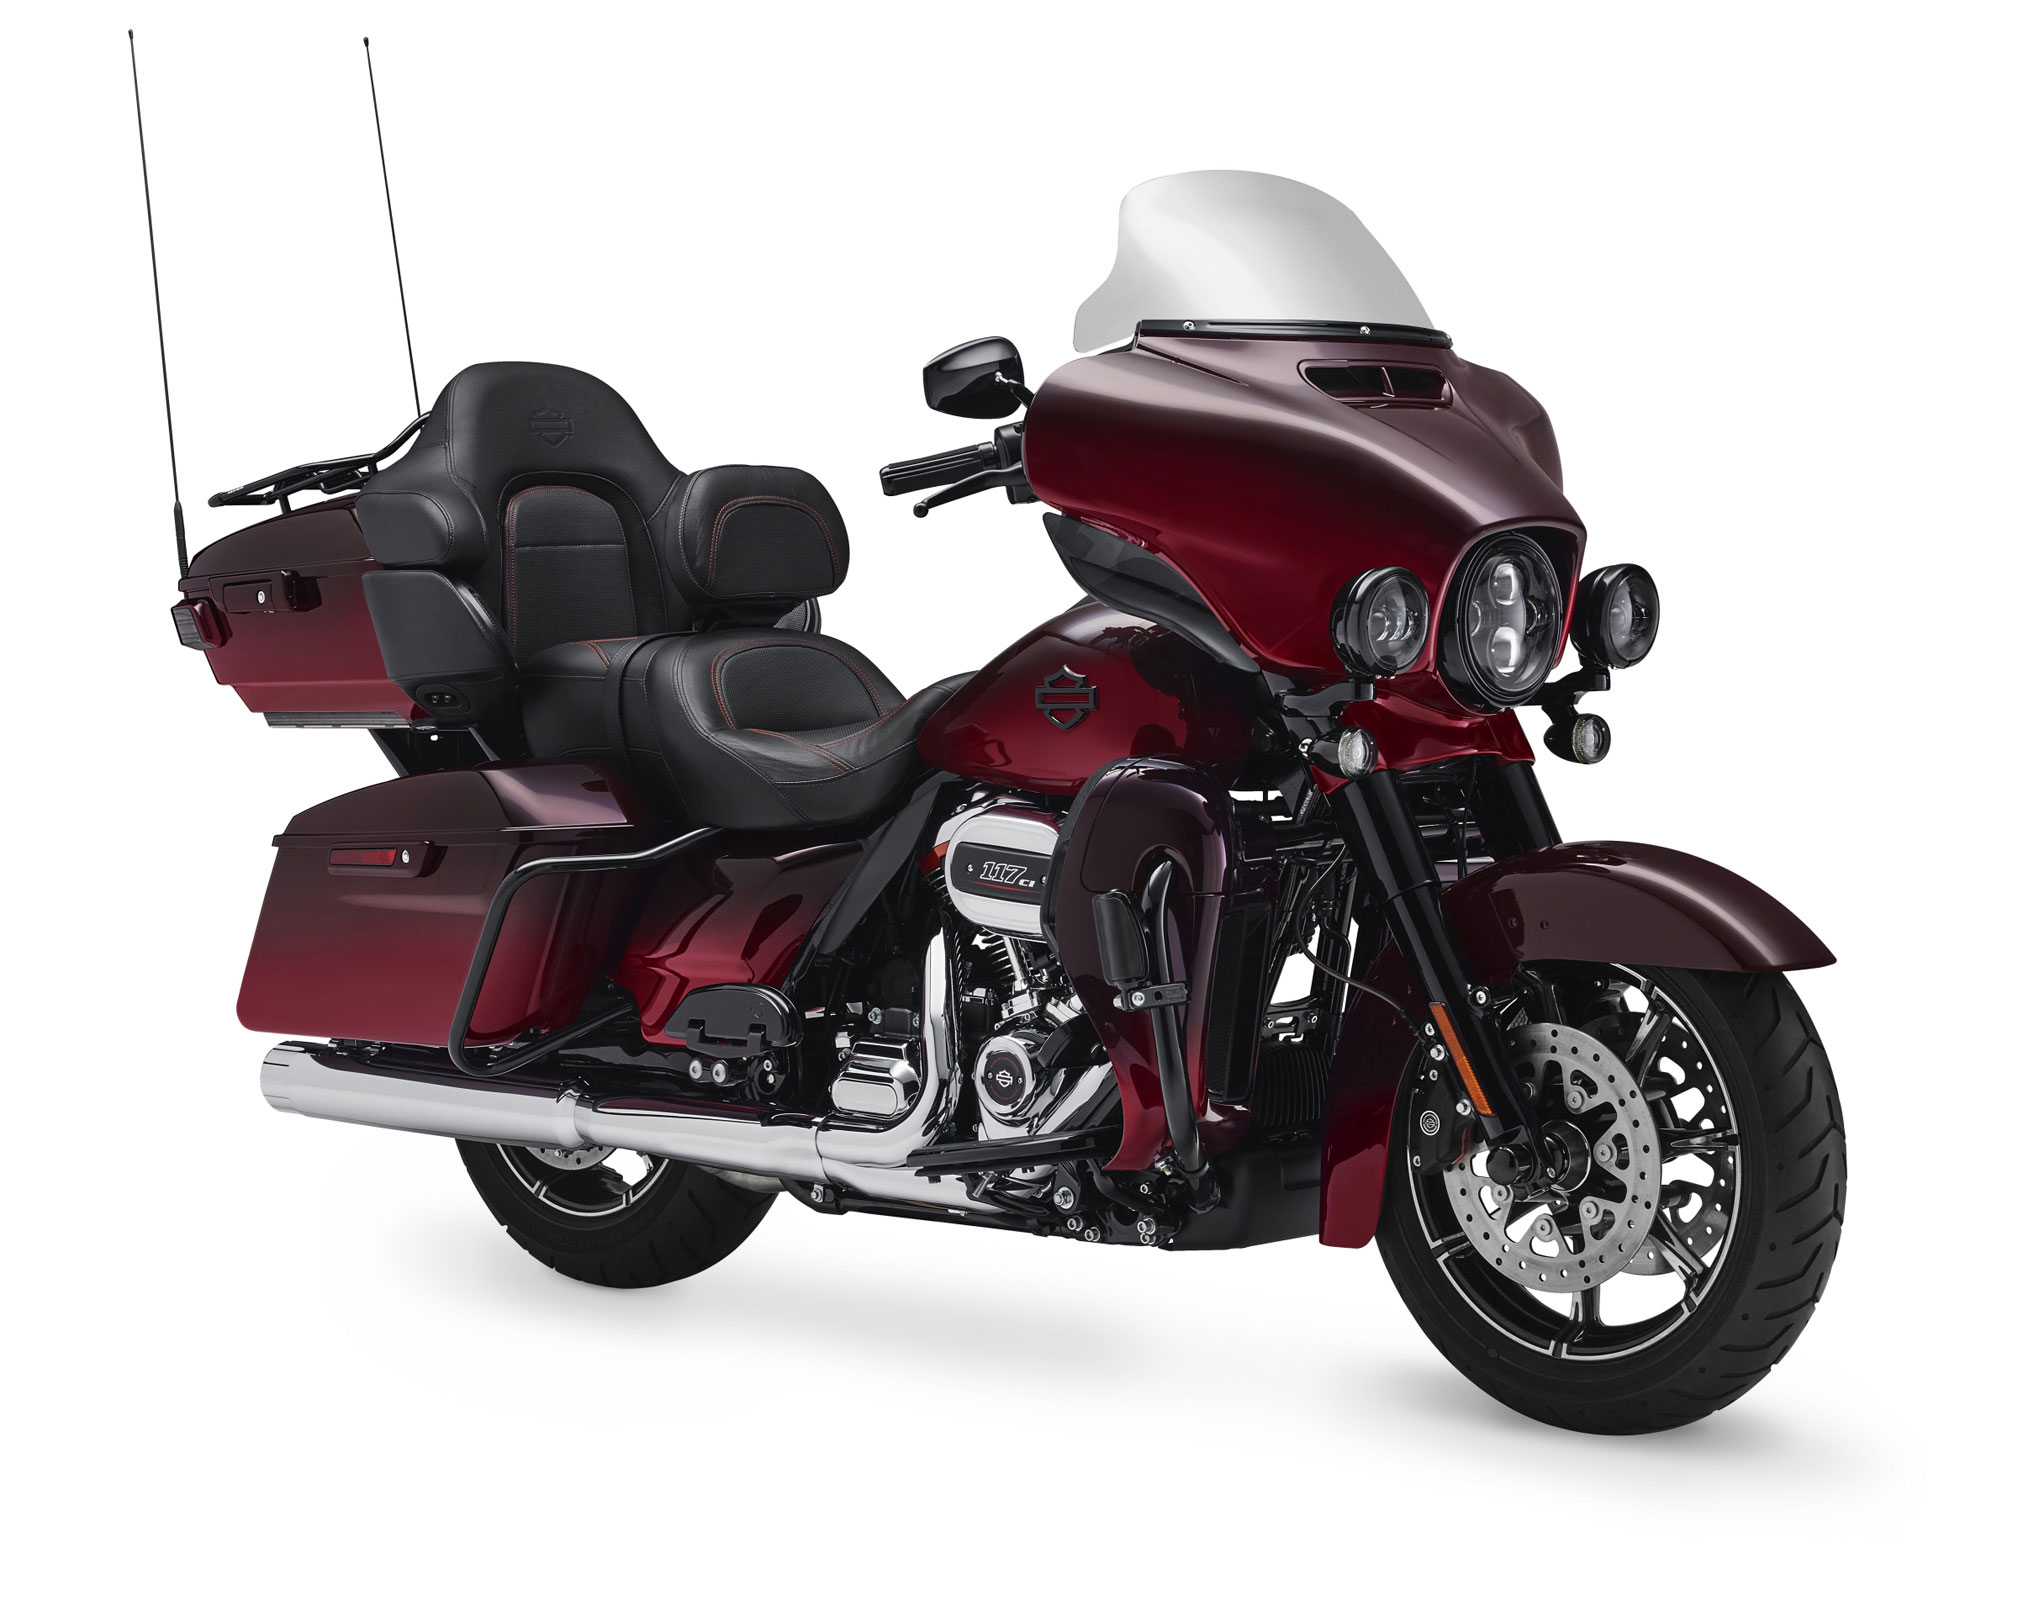 2018 Harley Davidson Cvo Limited Review Total Motorcycle